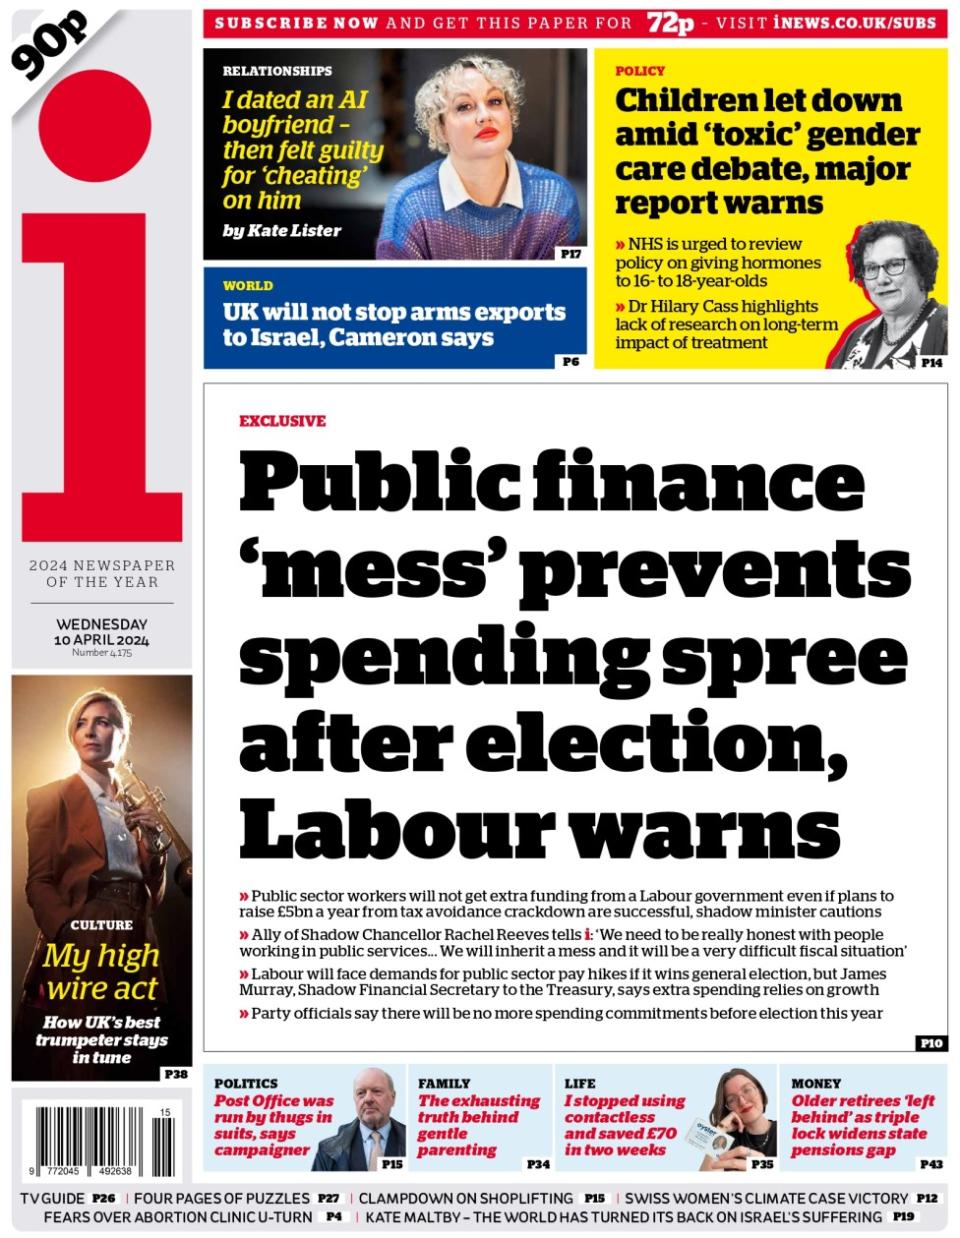 The headline in the i newspaper reads: Public finance 'mess' prevents spending spree after election, Labour warns.